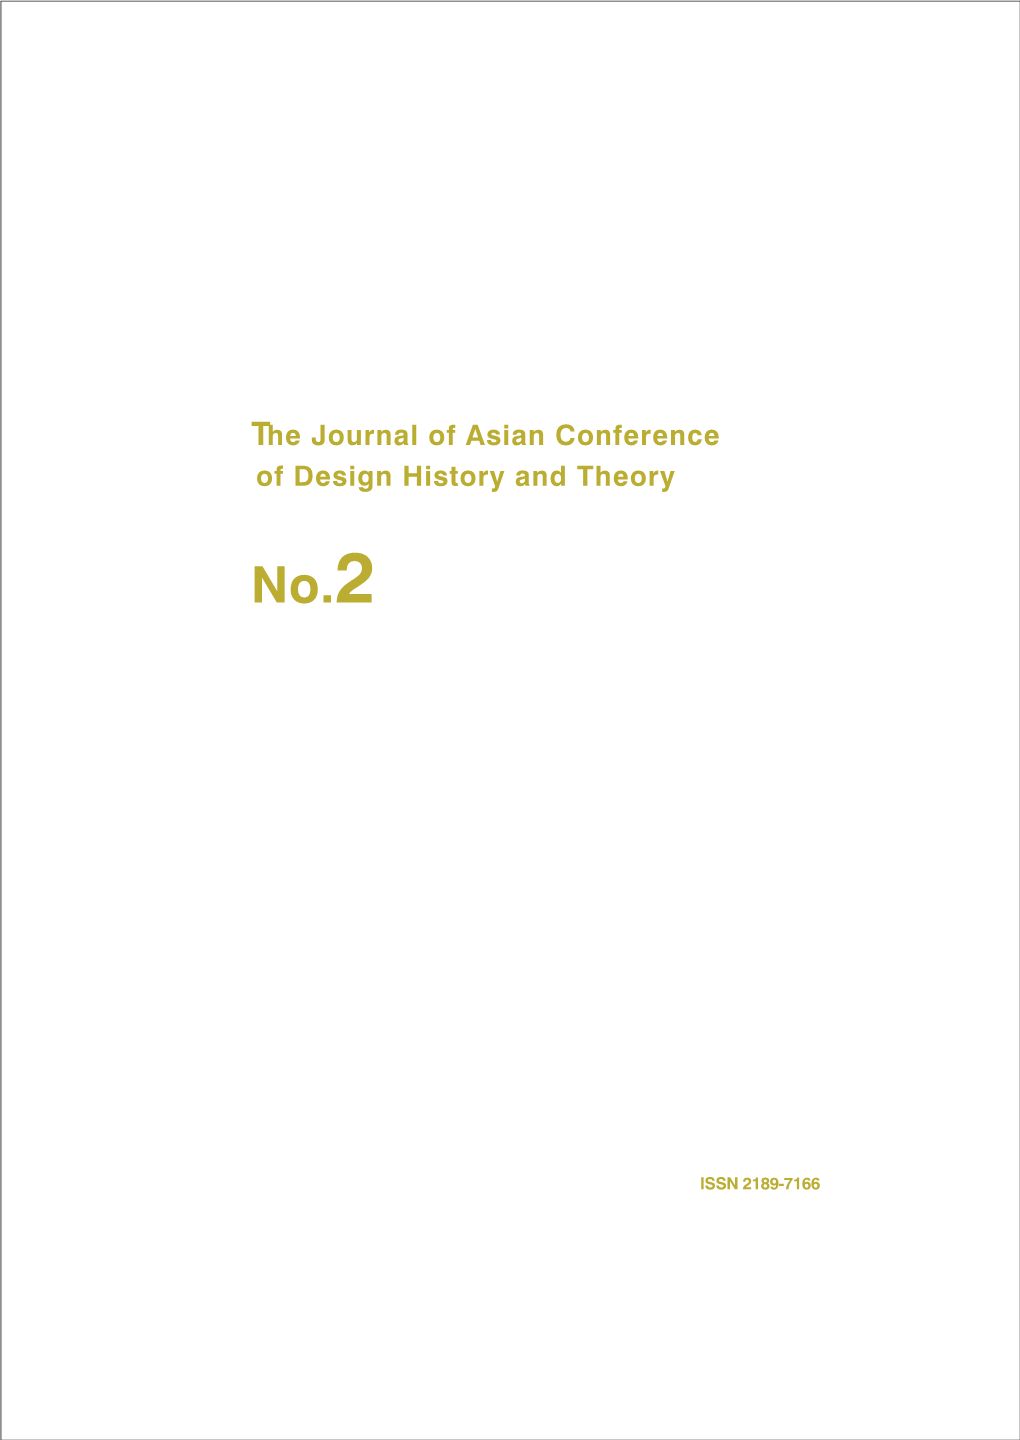 The Journal of Asian Conference of Design History and Theory